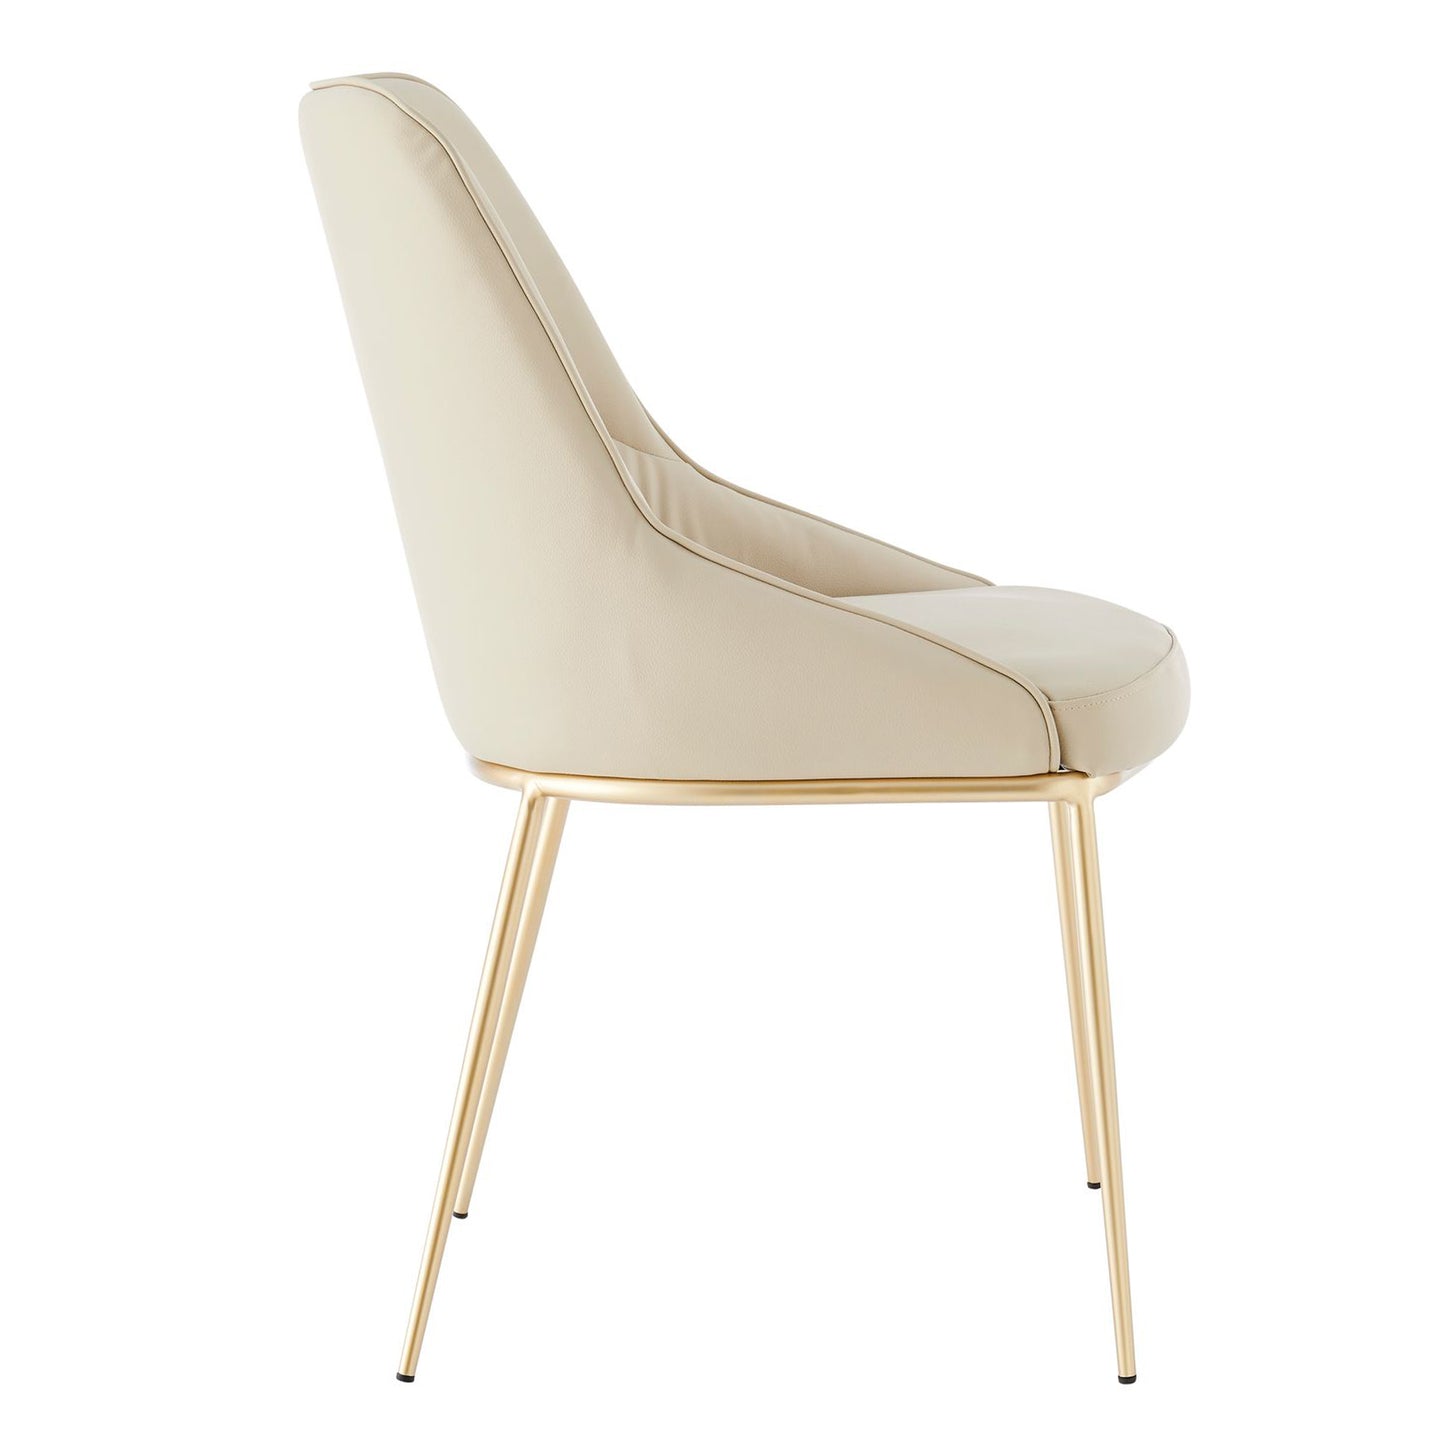 Beige Faux Leather Dining Chair Wrinkle Design With Gold Legs